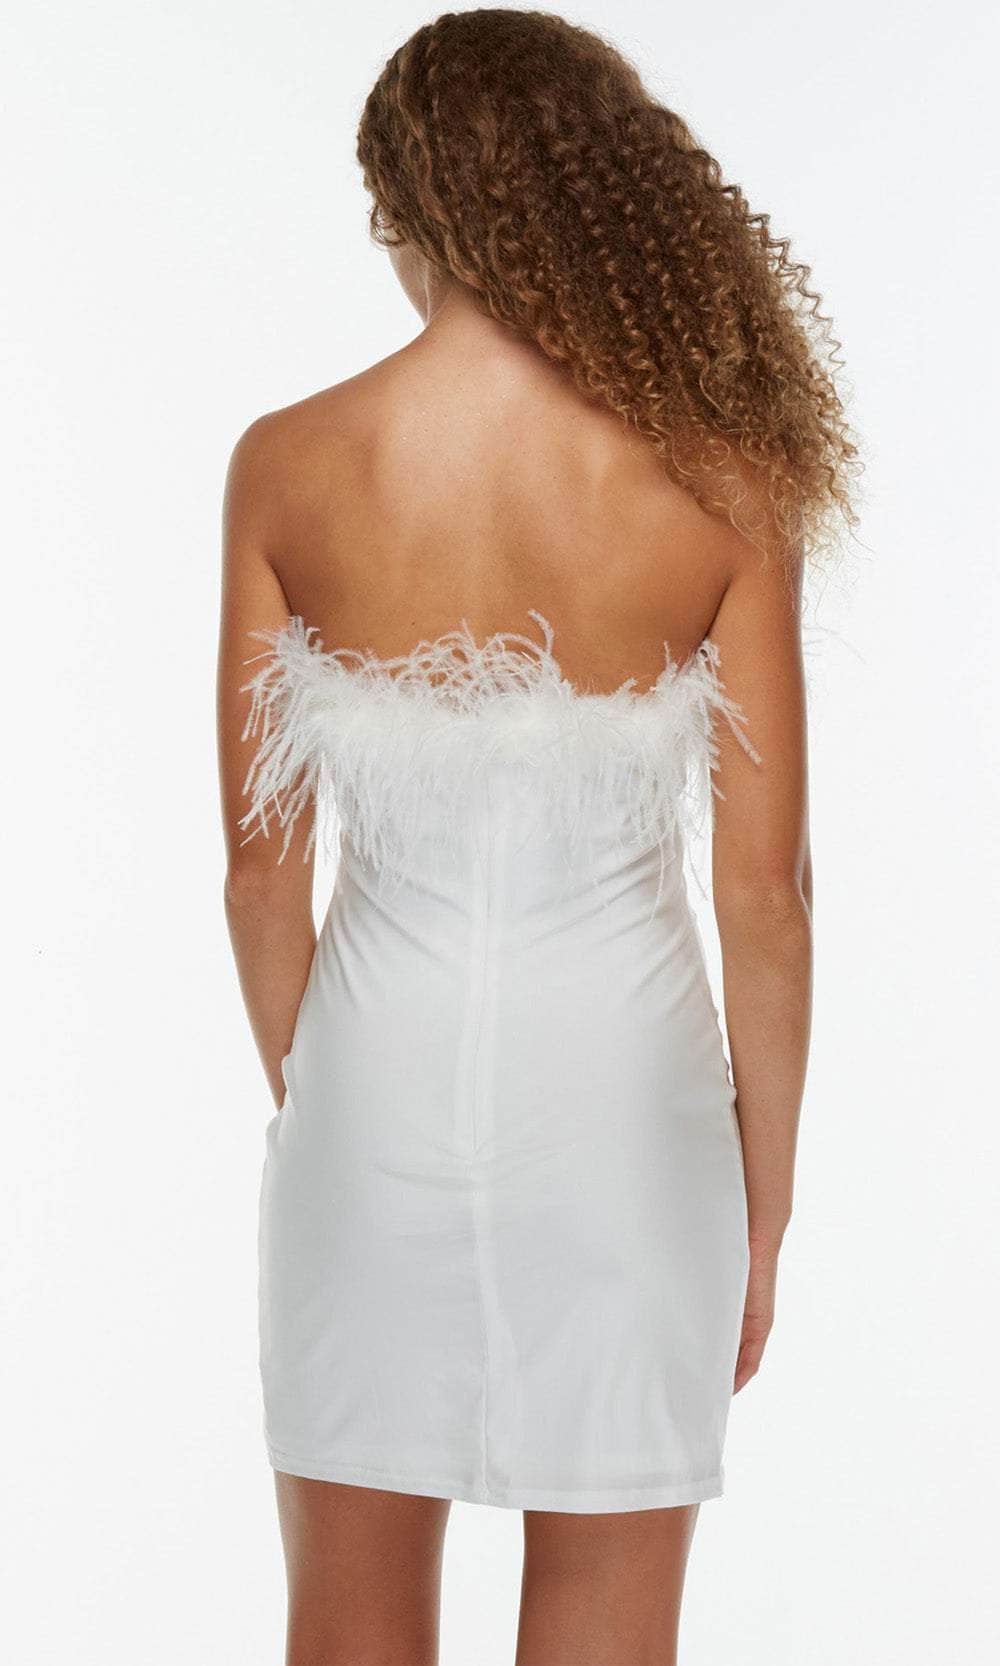 Alyce Paris 4524 - Feathered Strapless Cocktail Dress In White